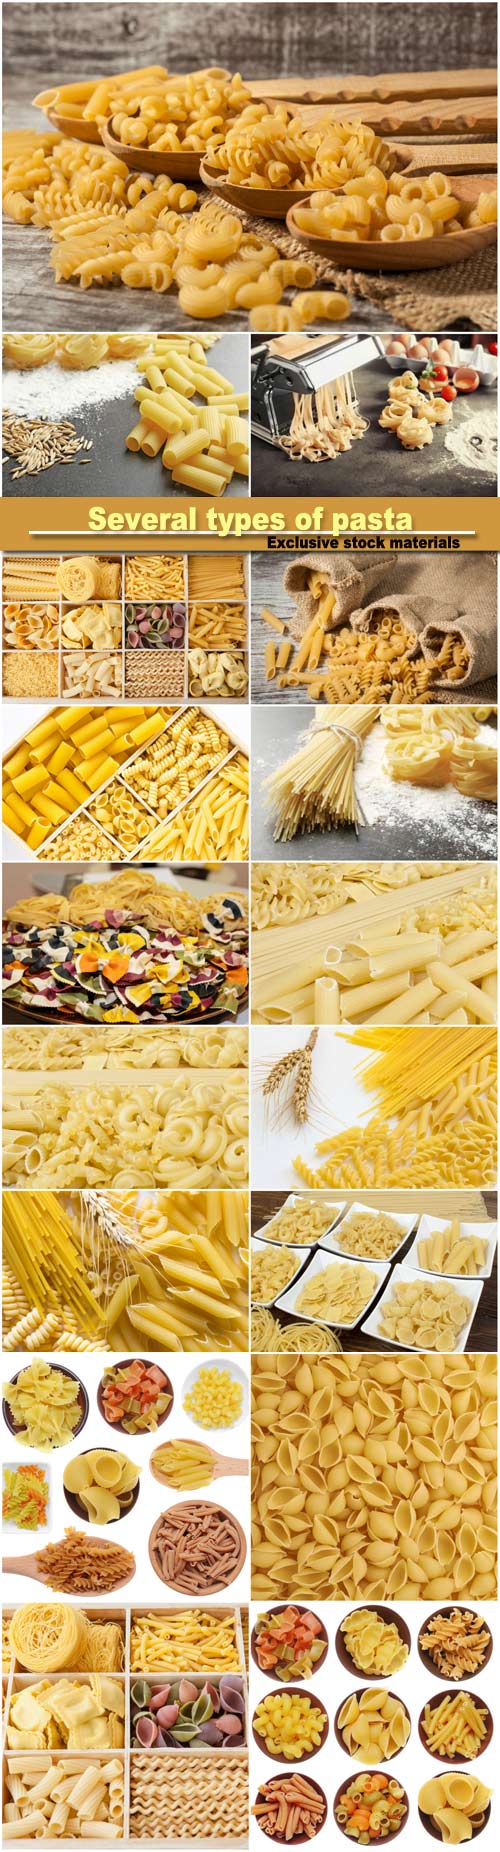 Several types of pasta, spikelets of wheat